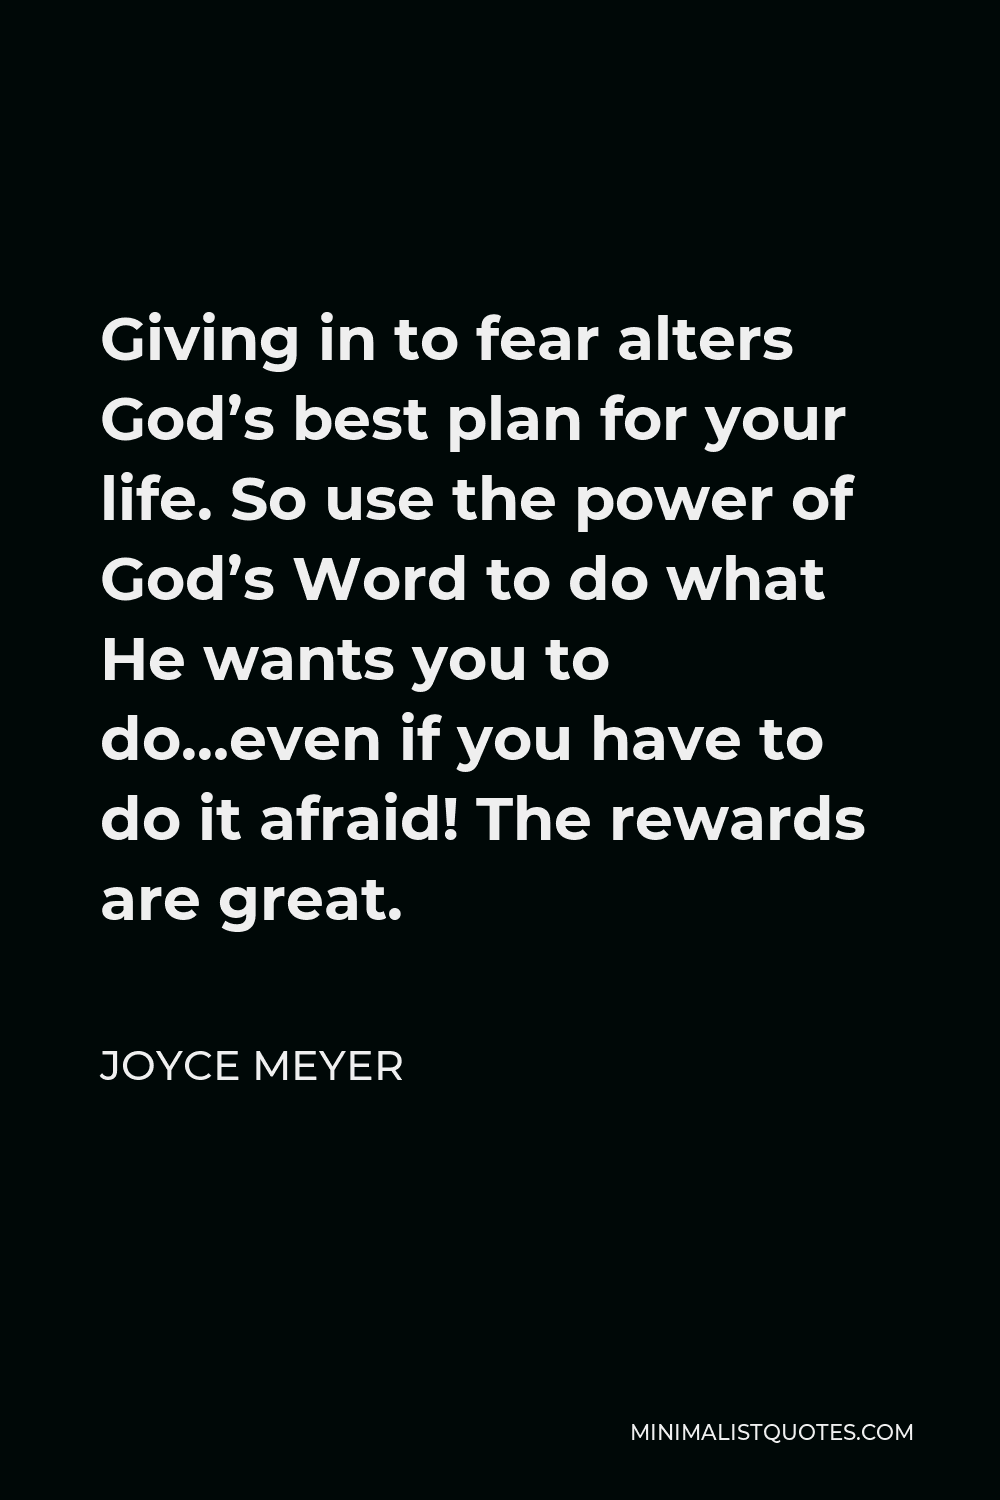 Joyce Meyer Quote - Giving in to fear alters God’s best plan for your life. So use the power of God’s Word to do what He wants you to do…even if you have to do it afraid! The rewards are great.